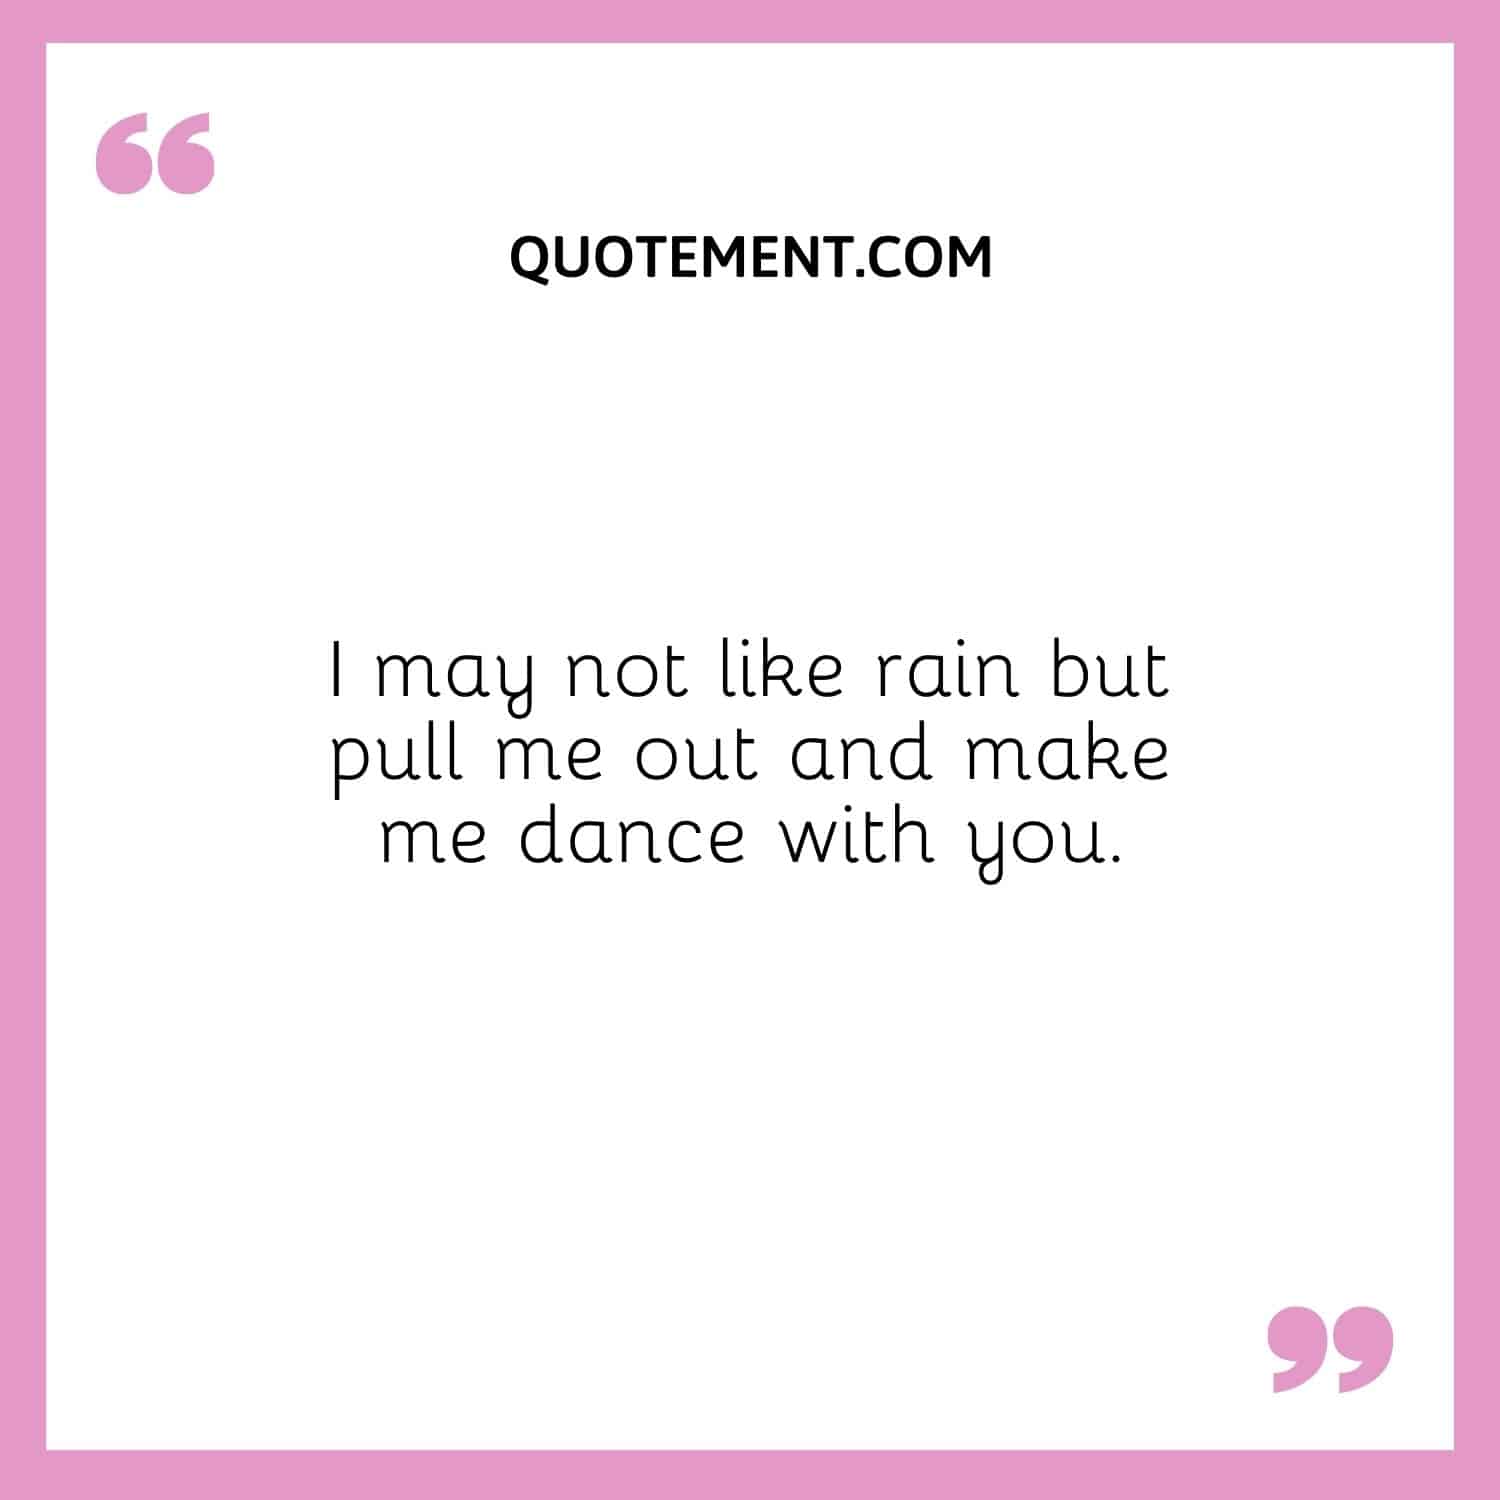 I may not like rain but pull me out and make me dance with you.